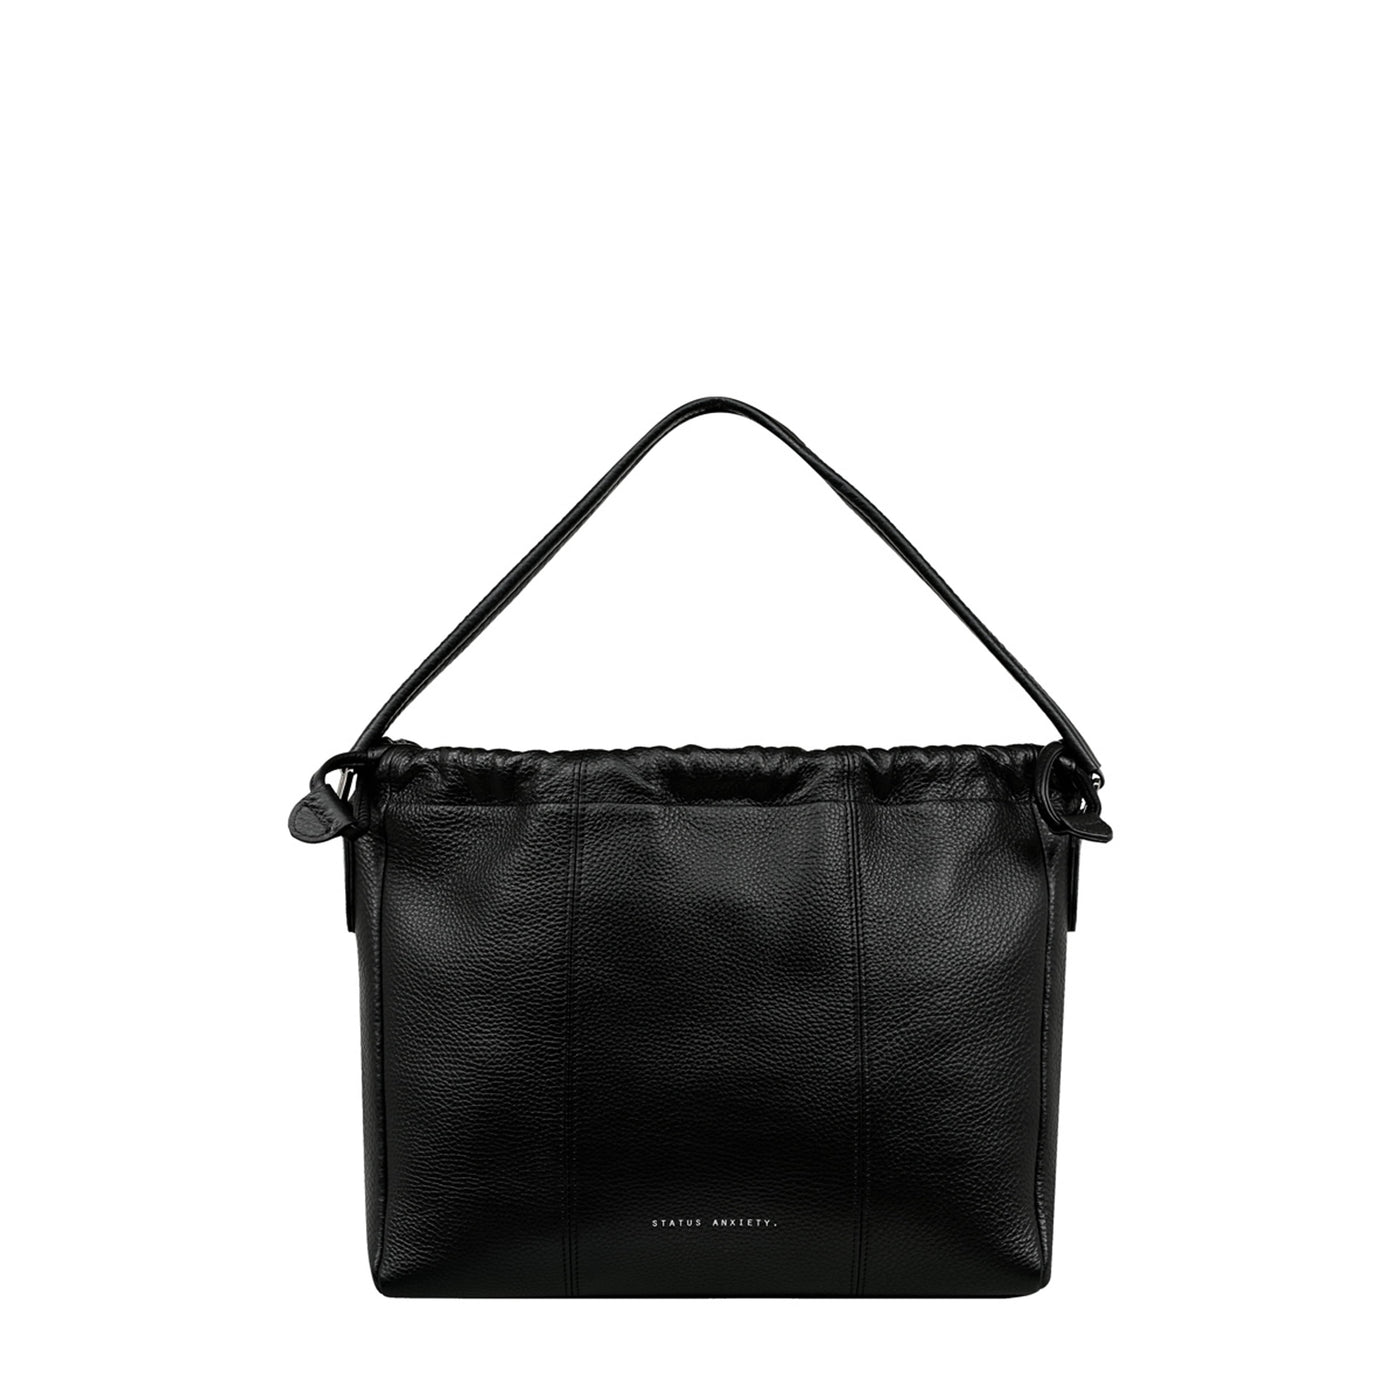 STATUS ANXIETY POINT OF NO RETURN - BLACK  The Status Anxiety Point Of No Return is a stylish bag in a large yet, convenient size great for daily use, now available in: Black.